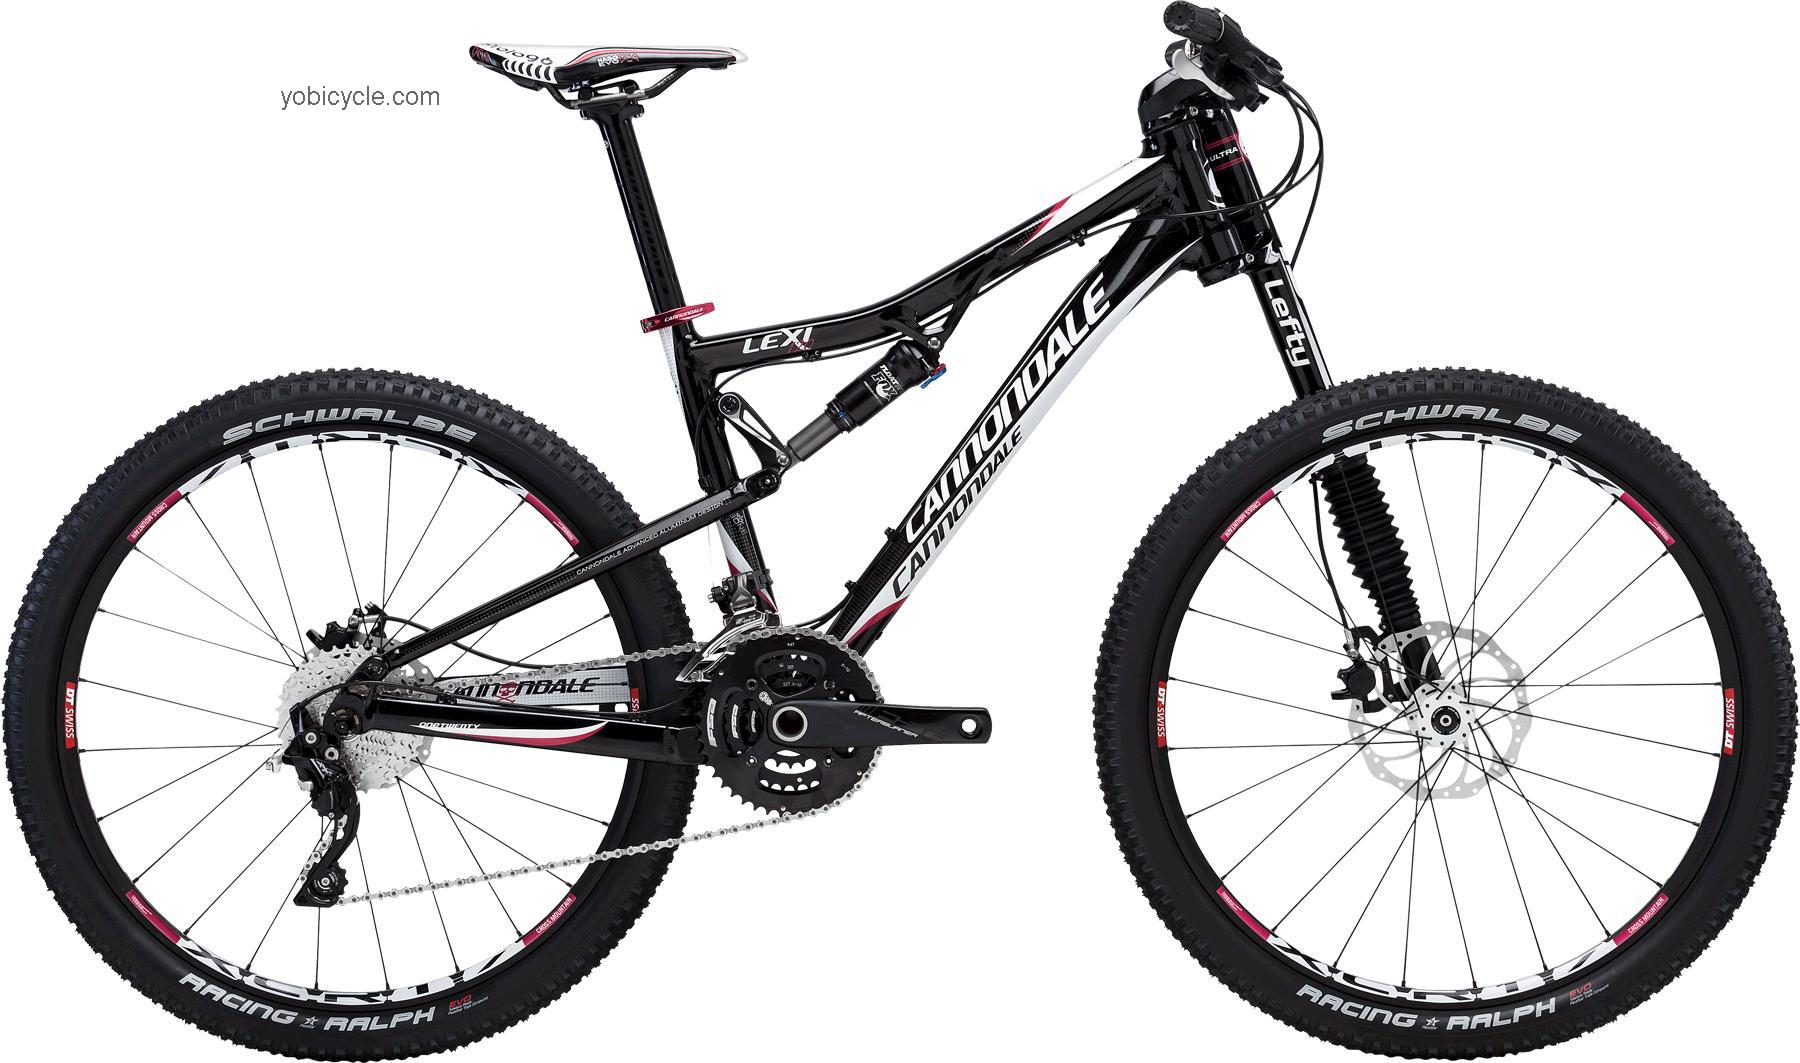 Cannondale  Lexi 1 Technical data and specifications